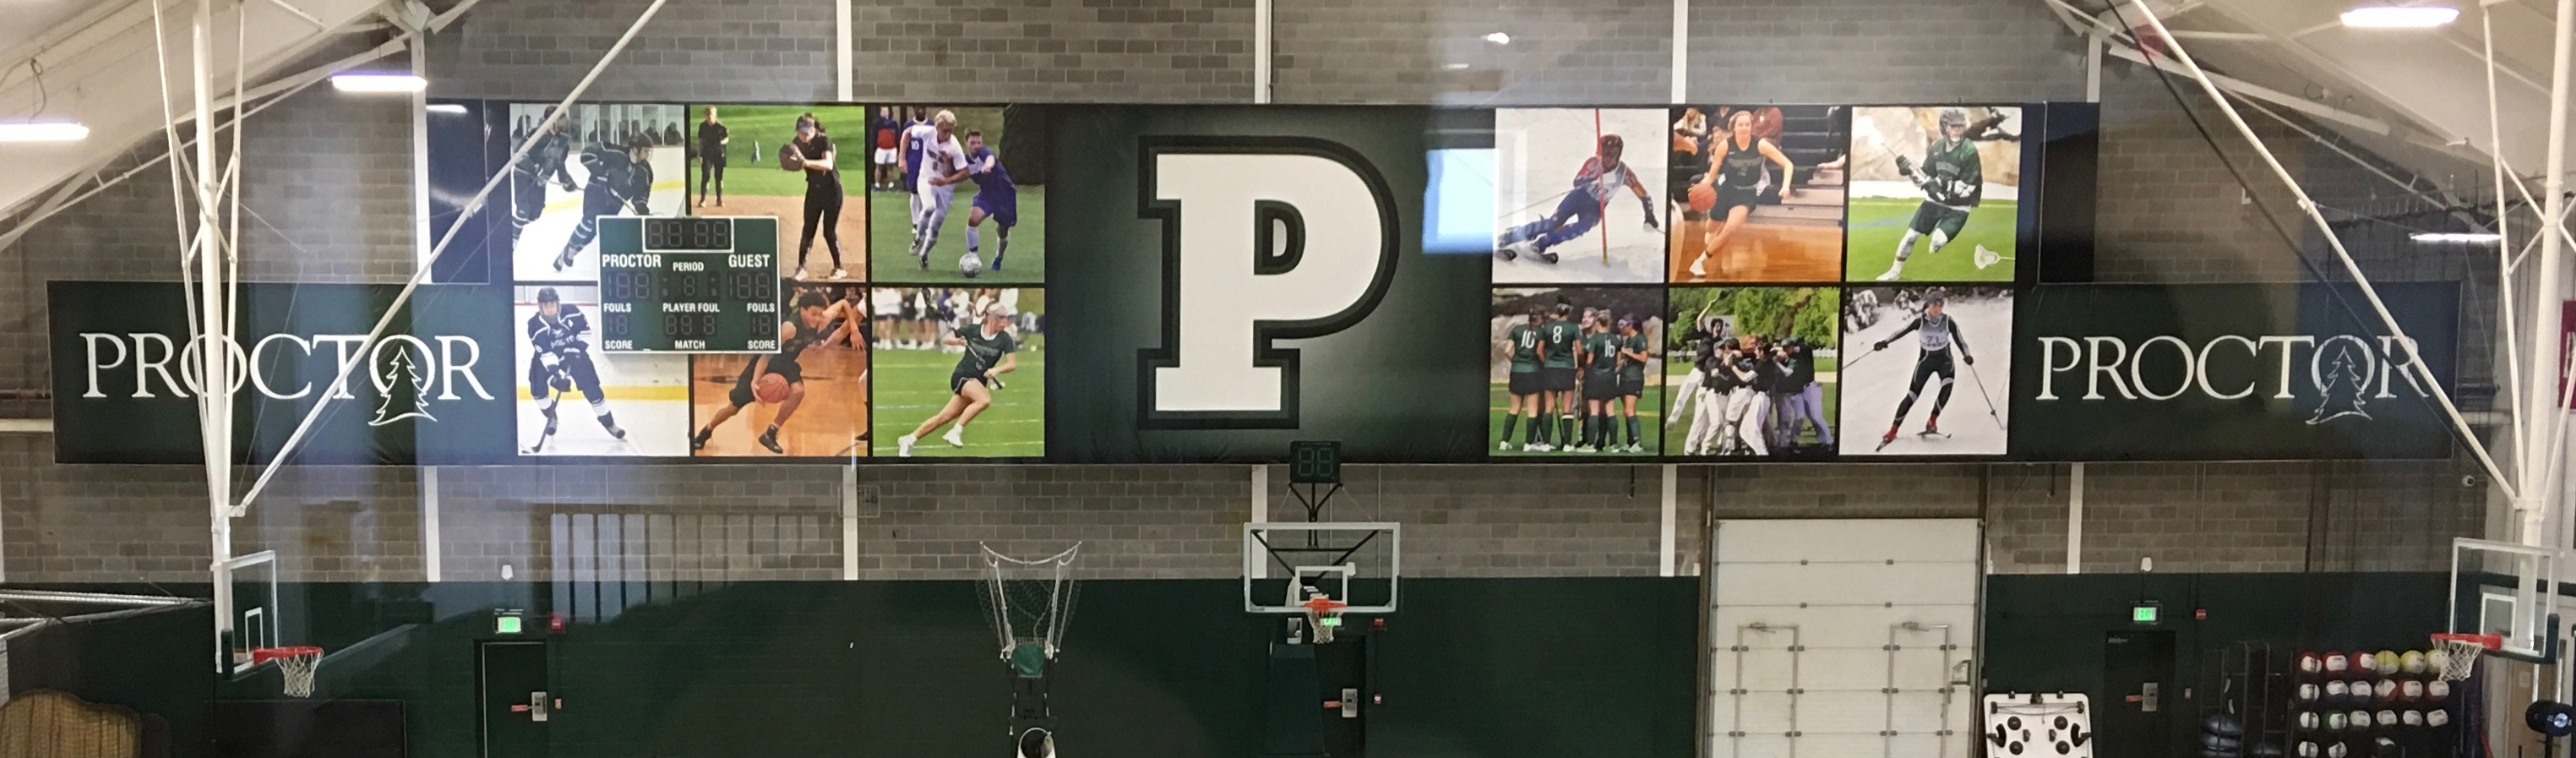 Exclusive videos from Proctor Academy Basketball